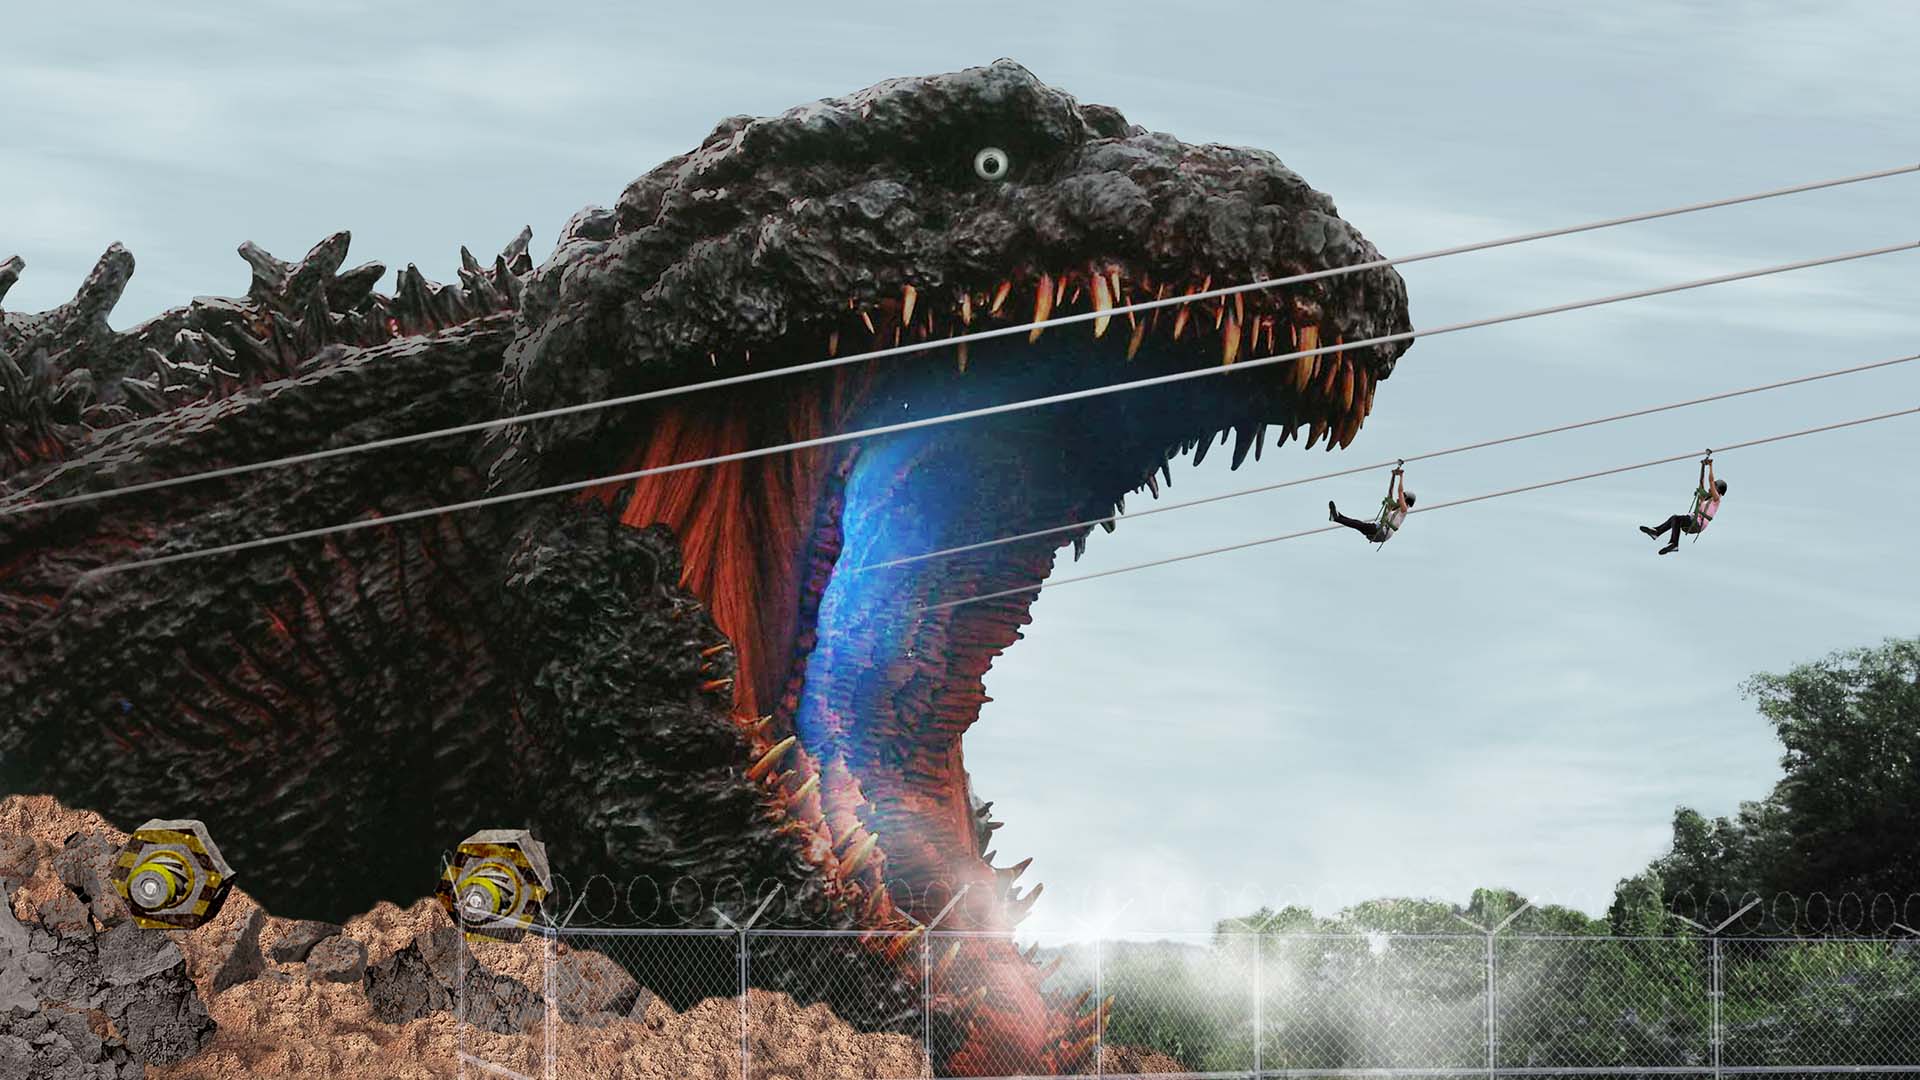 You Can Now Add Ziplining Into a Life-Sized Godzilla Statue to Your Post-Pandemic Travel List